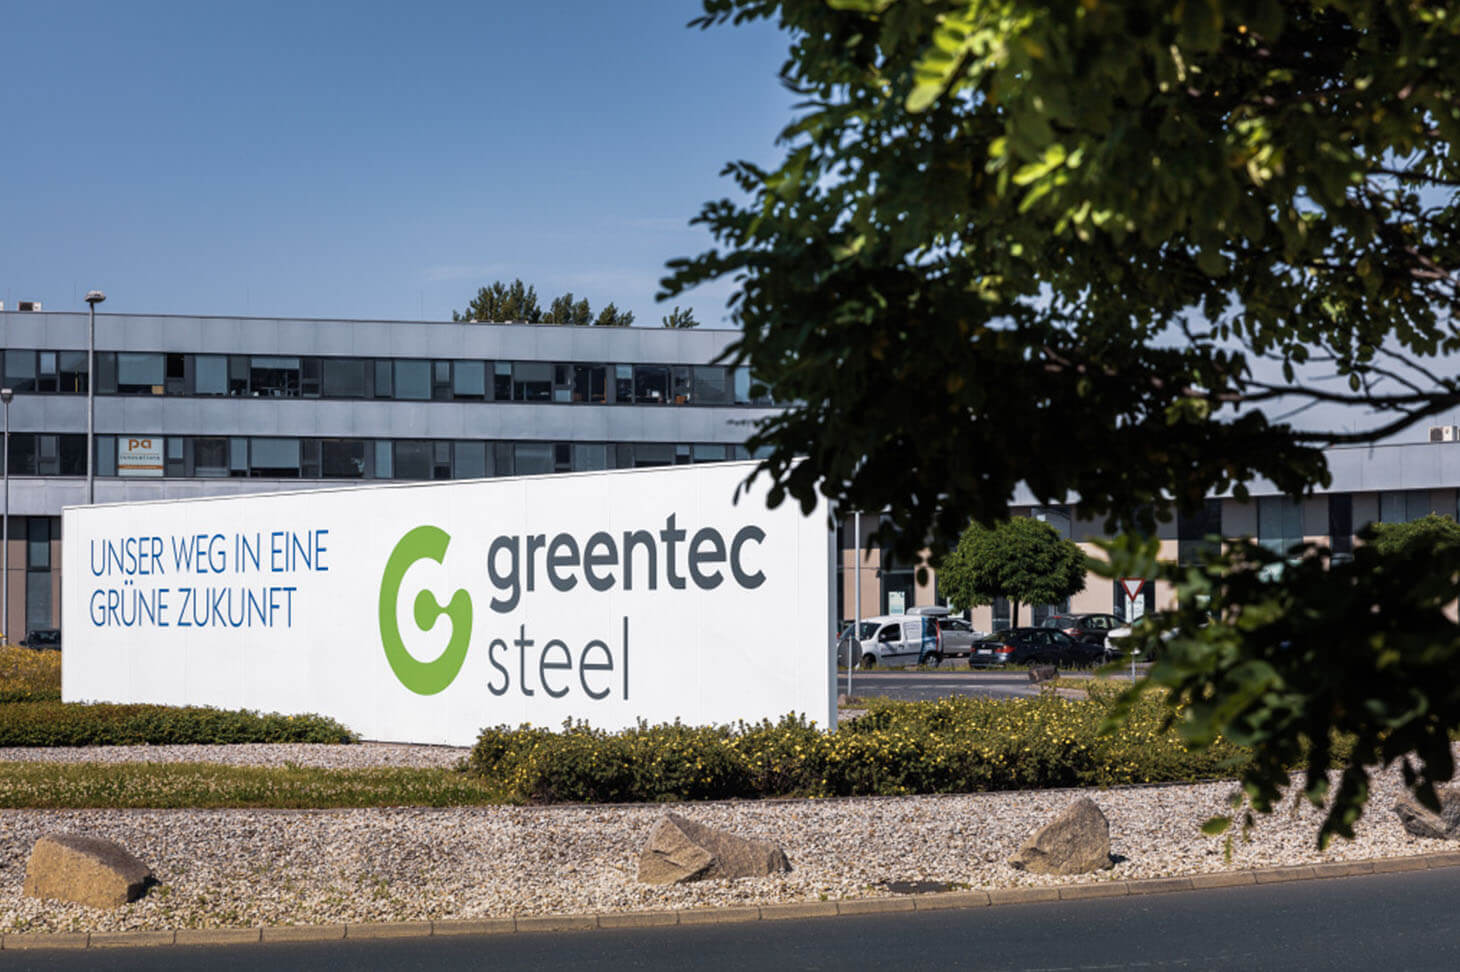 our path to a green future, greentec sign in front of a building